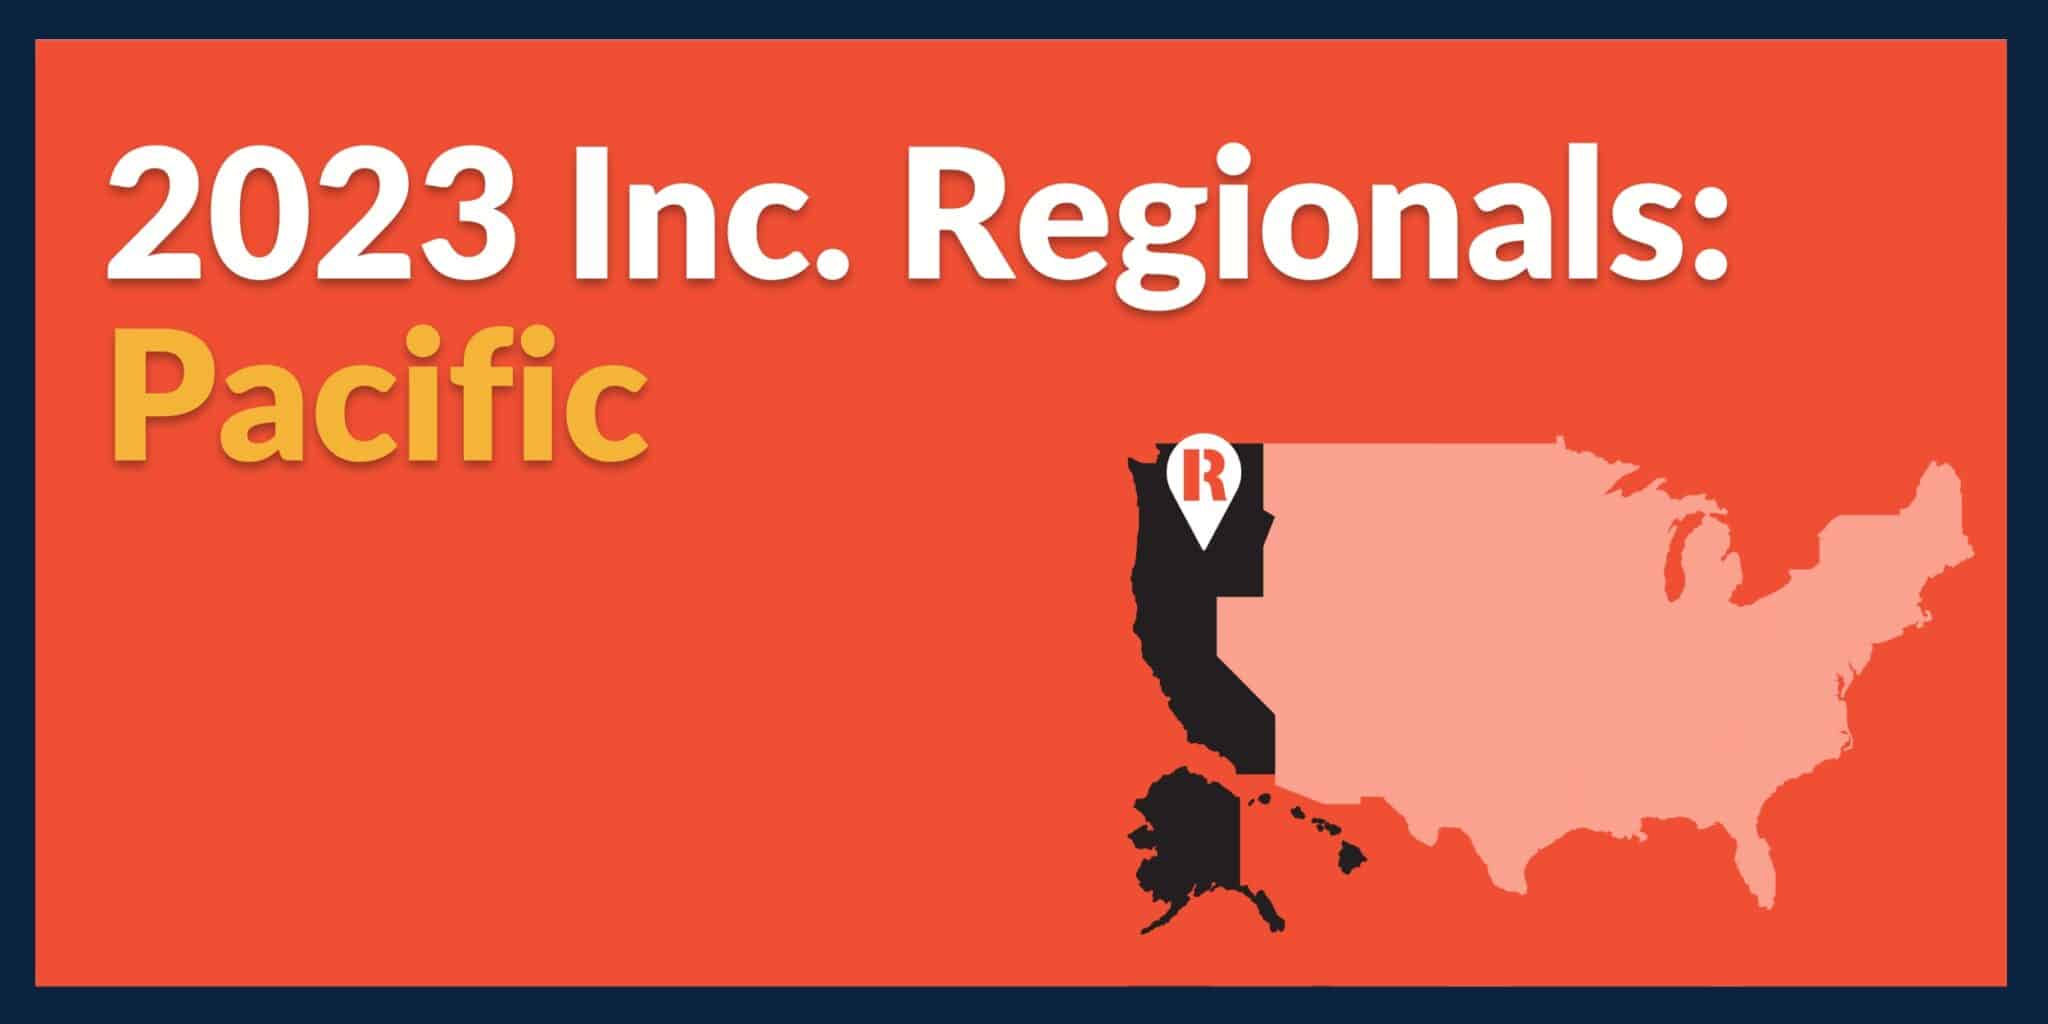 Mission Wealth Honored on the 2023 Inc. Regionals: Pacific List